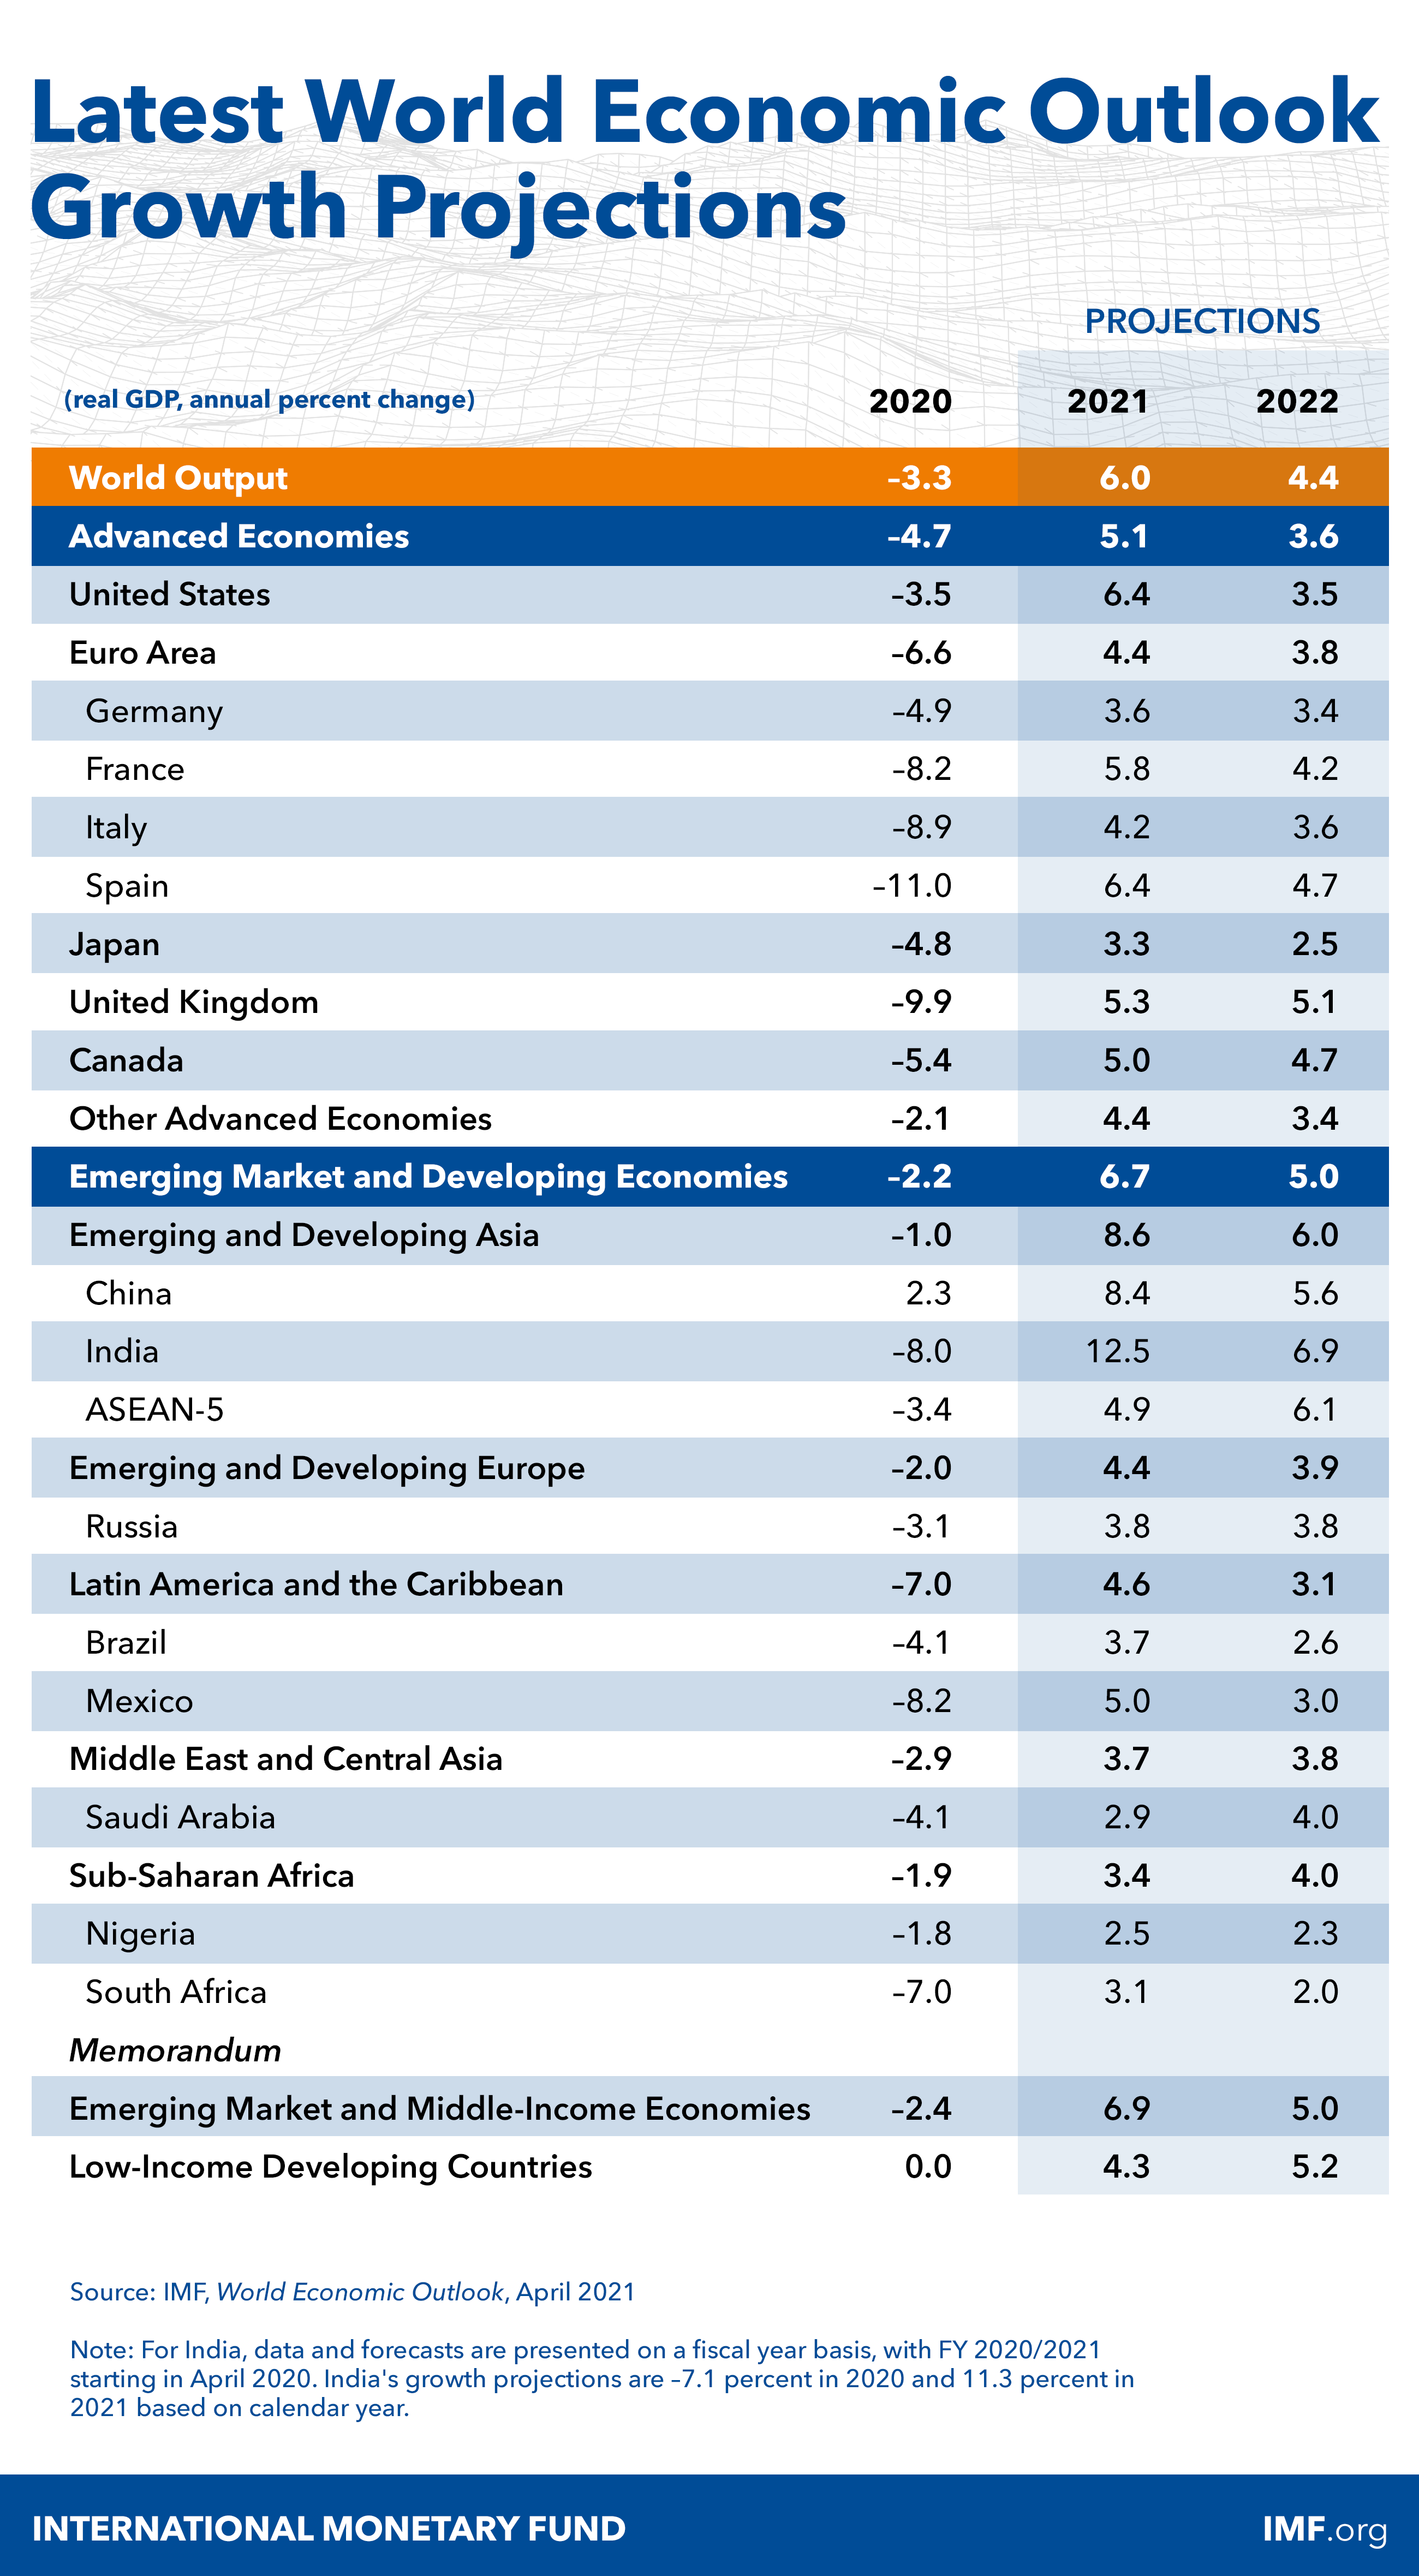 Latest Growth Projections Table, April 2021 World Economic Outlook